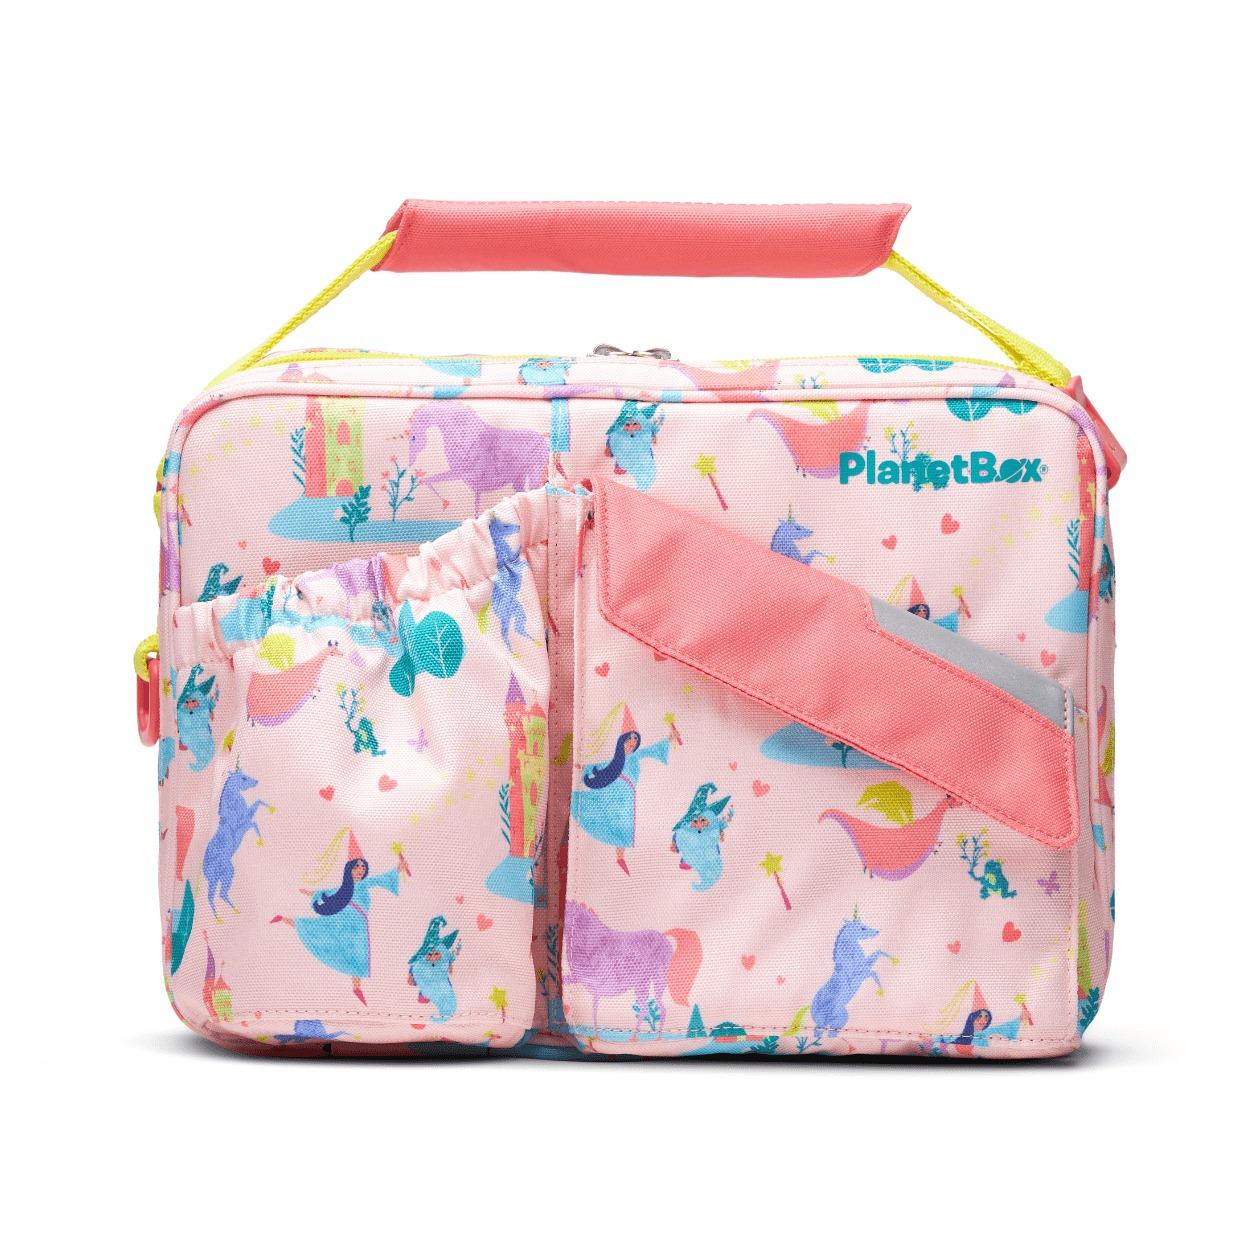 PlanetBox Insulated Lunch Carry Bag - Fairytale Fantasy